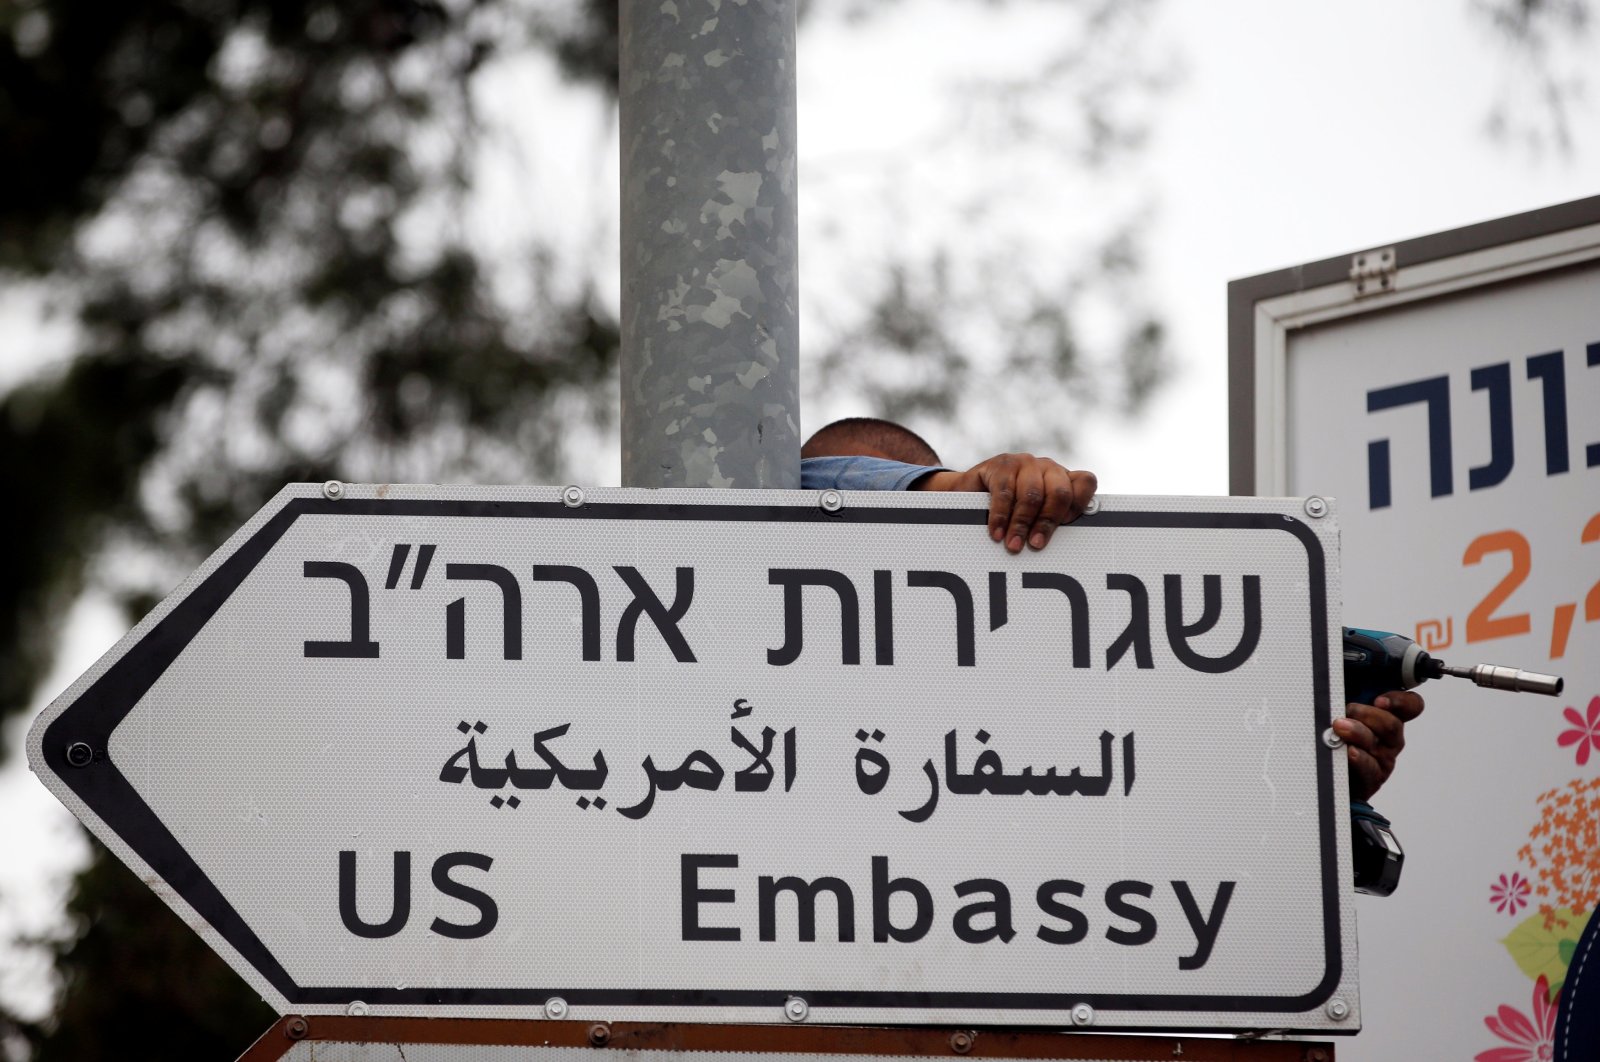 A worker hangs a road sign directing to the U.S. Embassy, in the area of the U.S. Consulate in East Jerusalem, occupied Palestine, May 7, 2018. (Reuters File Photo)